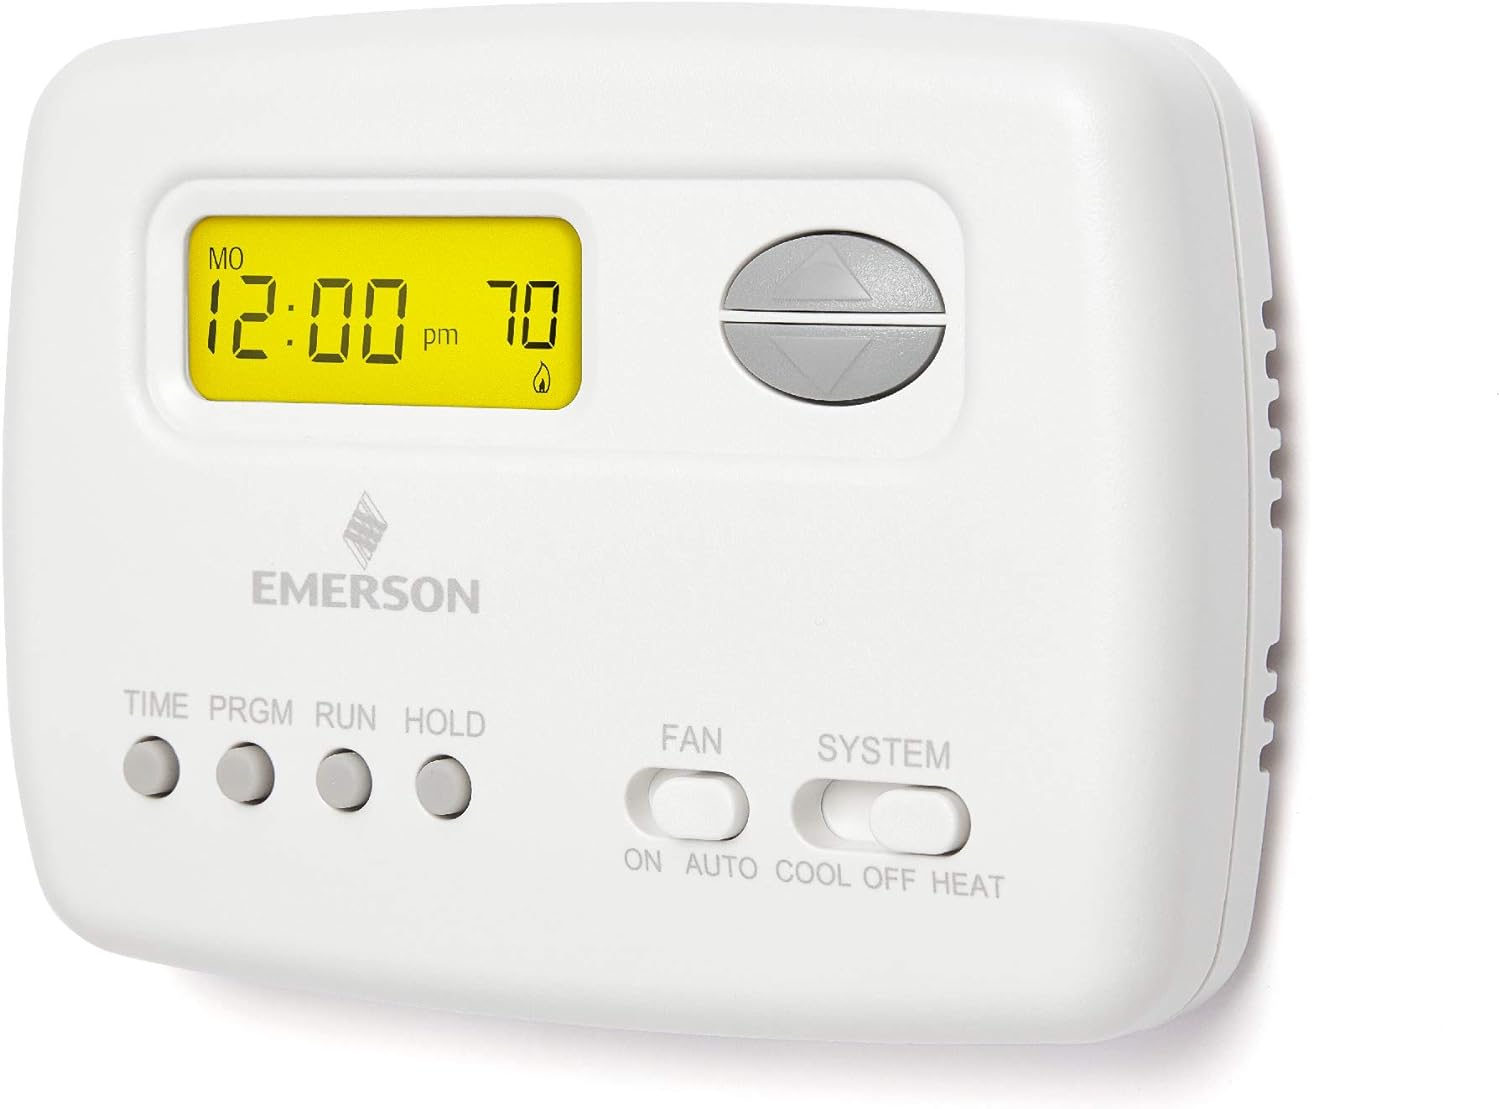 Emerson Thermostats Emerson 1F78-151 Single-Stage Programmable Digital Thermostat, 5-2 Day